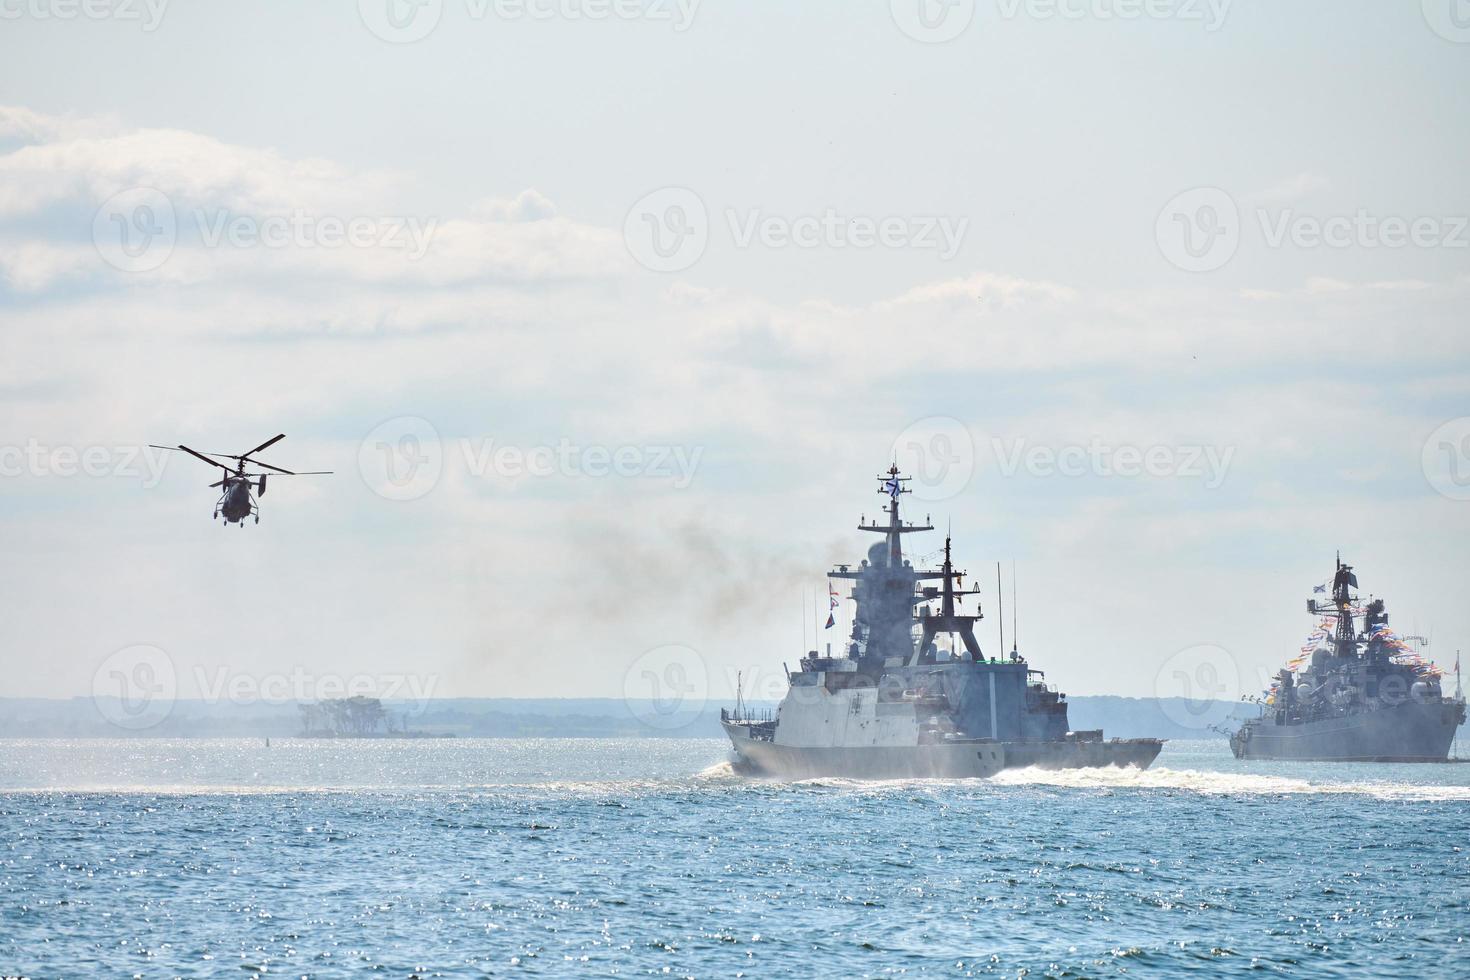 Battleships war ships corvette during naval exercises and helicopter maneuvering over sea, warships photo